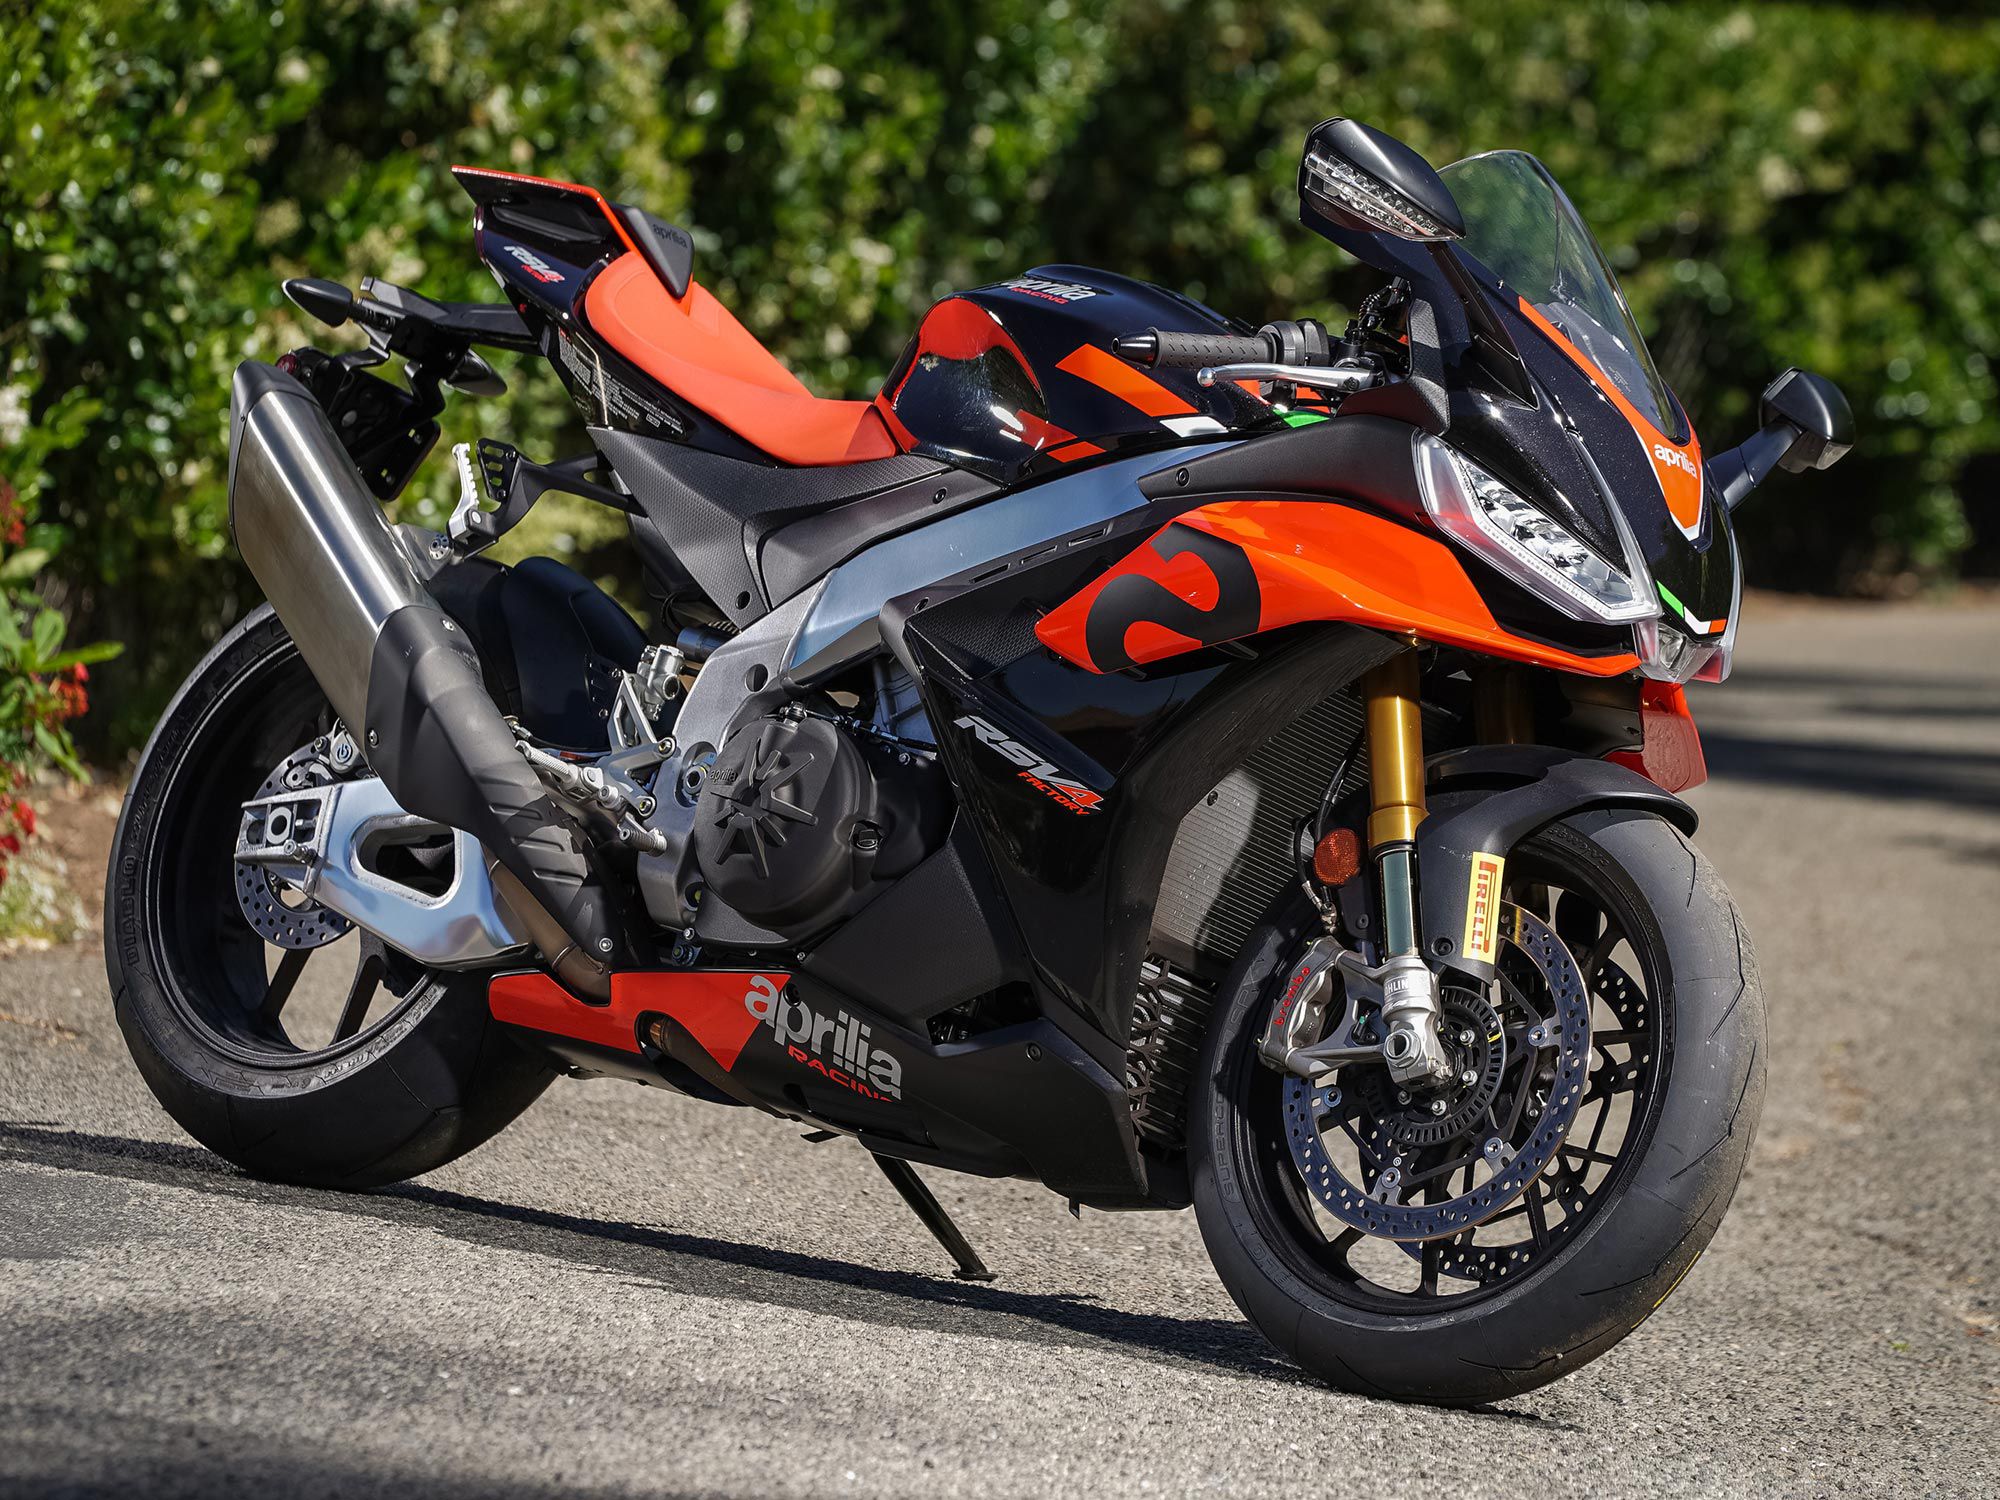 Aprilia has taken a significant step forward with its 2021 RSV4 Factory. Not only does it look more modern but it includes an easier to use and still world-class electronics package.